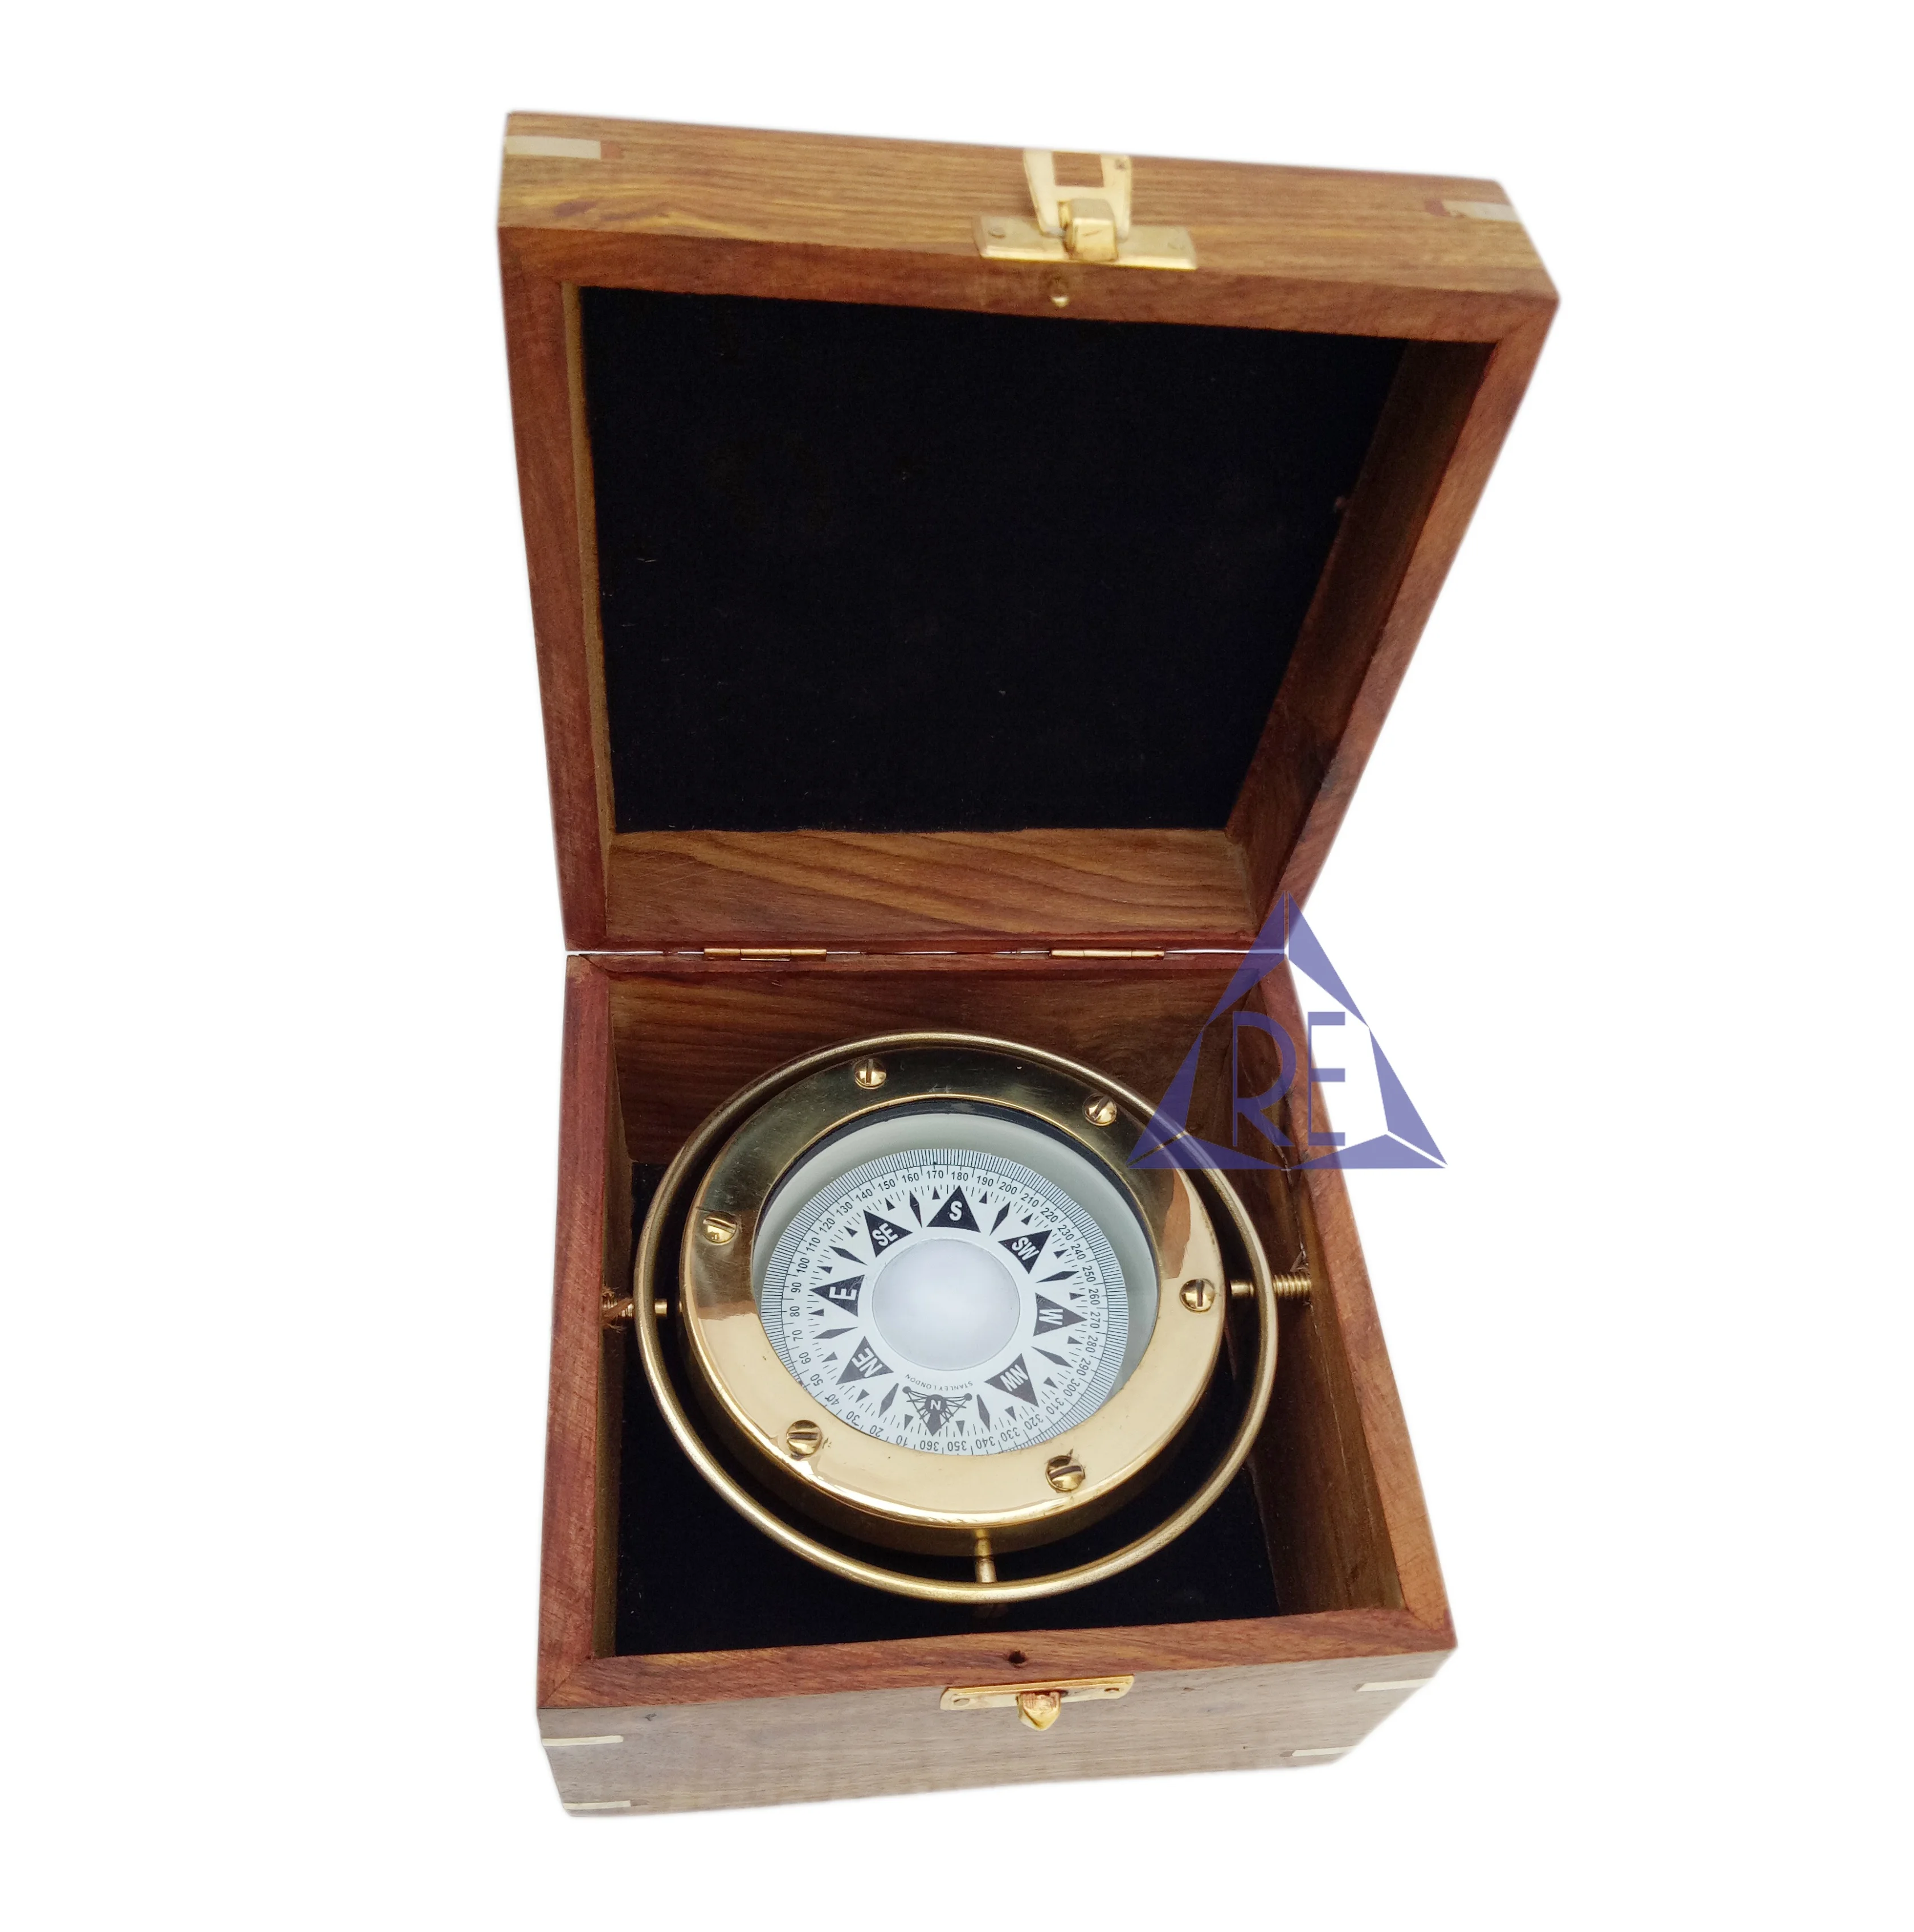 Details about   Antique maritime solid shiny brass gimbals ship bridge compass with wooden base 